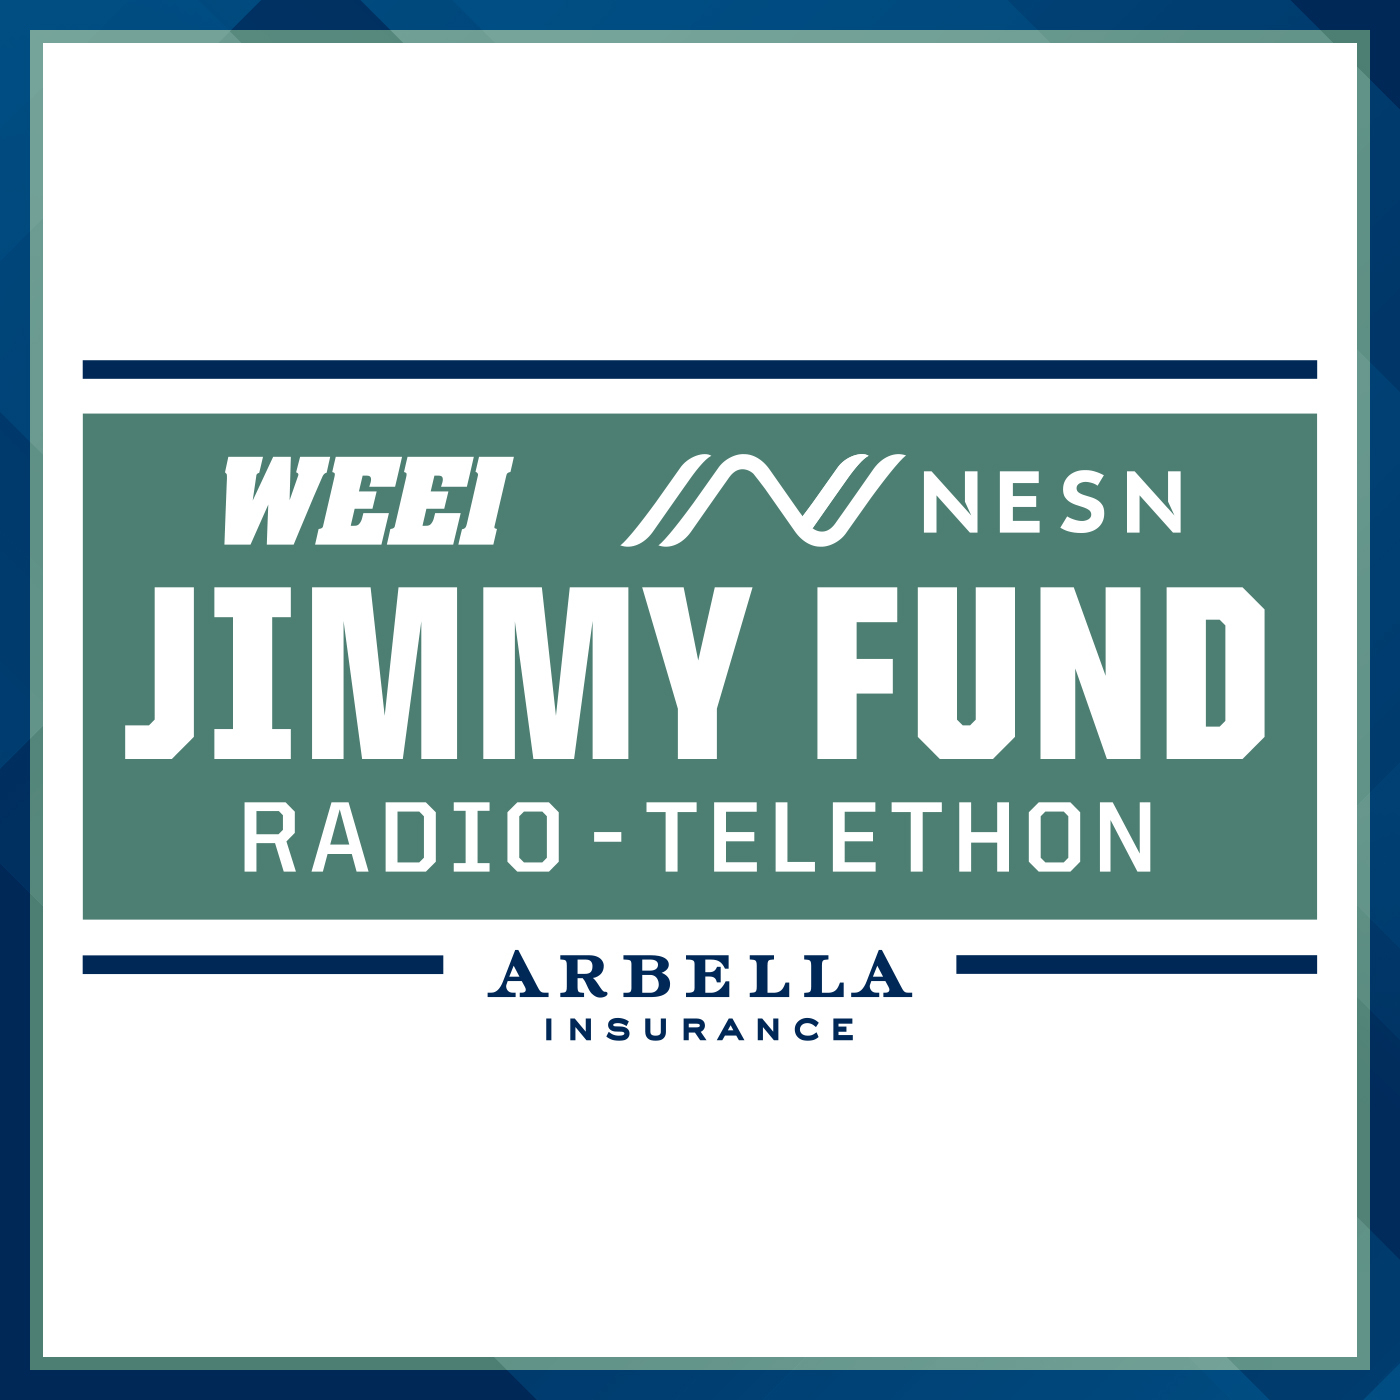 Tedy Bruschi details his recent stroke and stresses the importance of the Jimmy Fund; Tedy discusses Josh Gordon’s return, the Patriots’ depth at linebacker, and Antonio Brown’s helmet drama